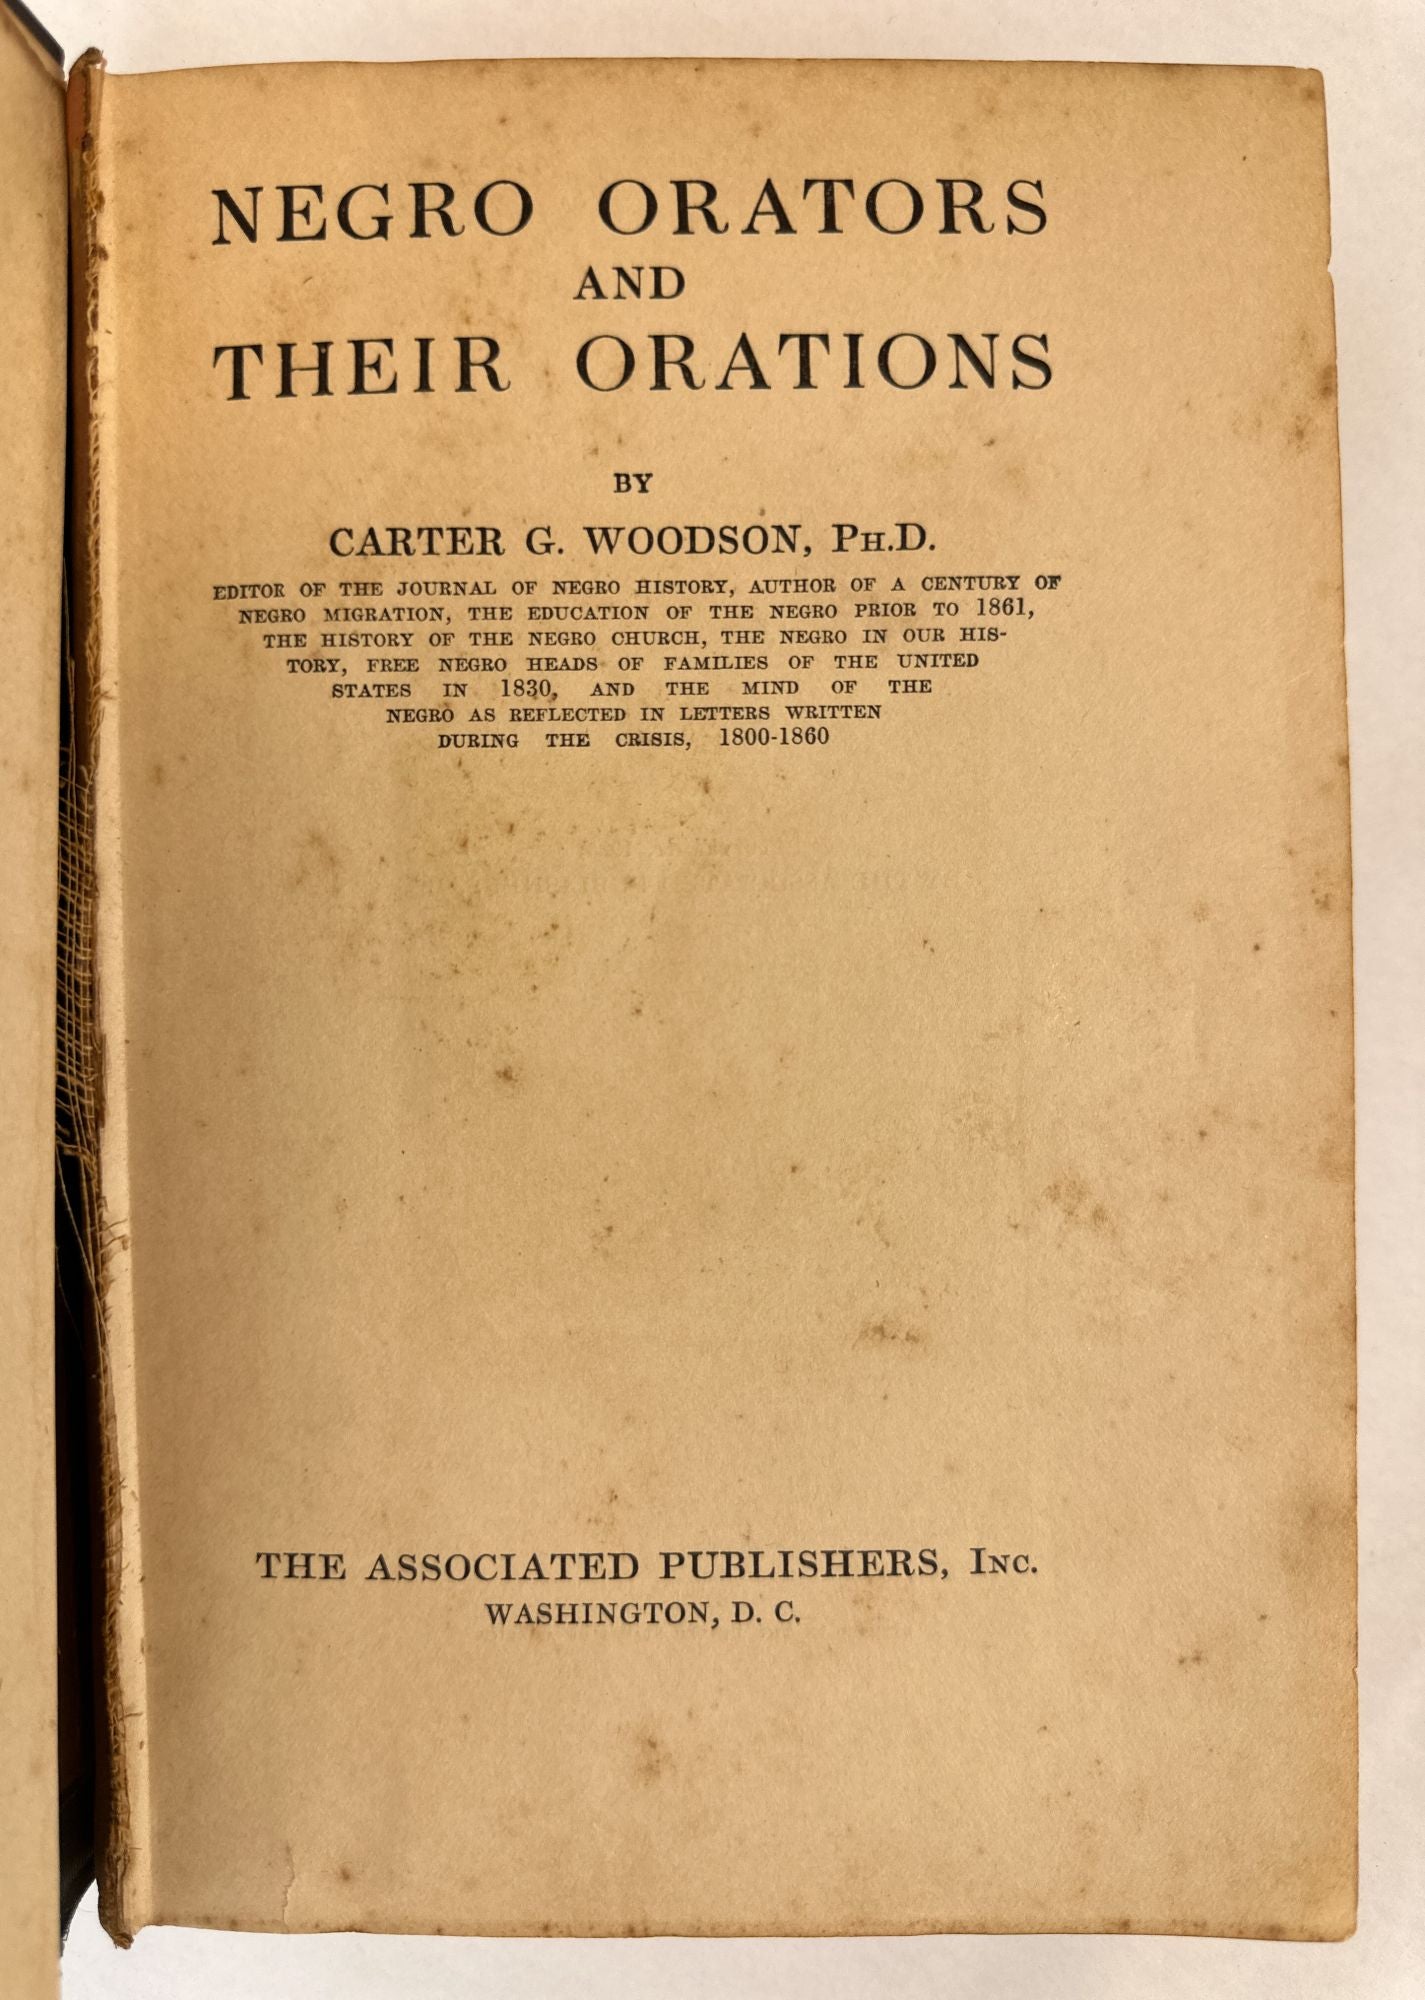 Product Image for NEGRO ORATORS AND THEIR ORATIONS [Signed]